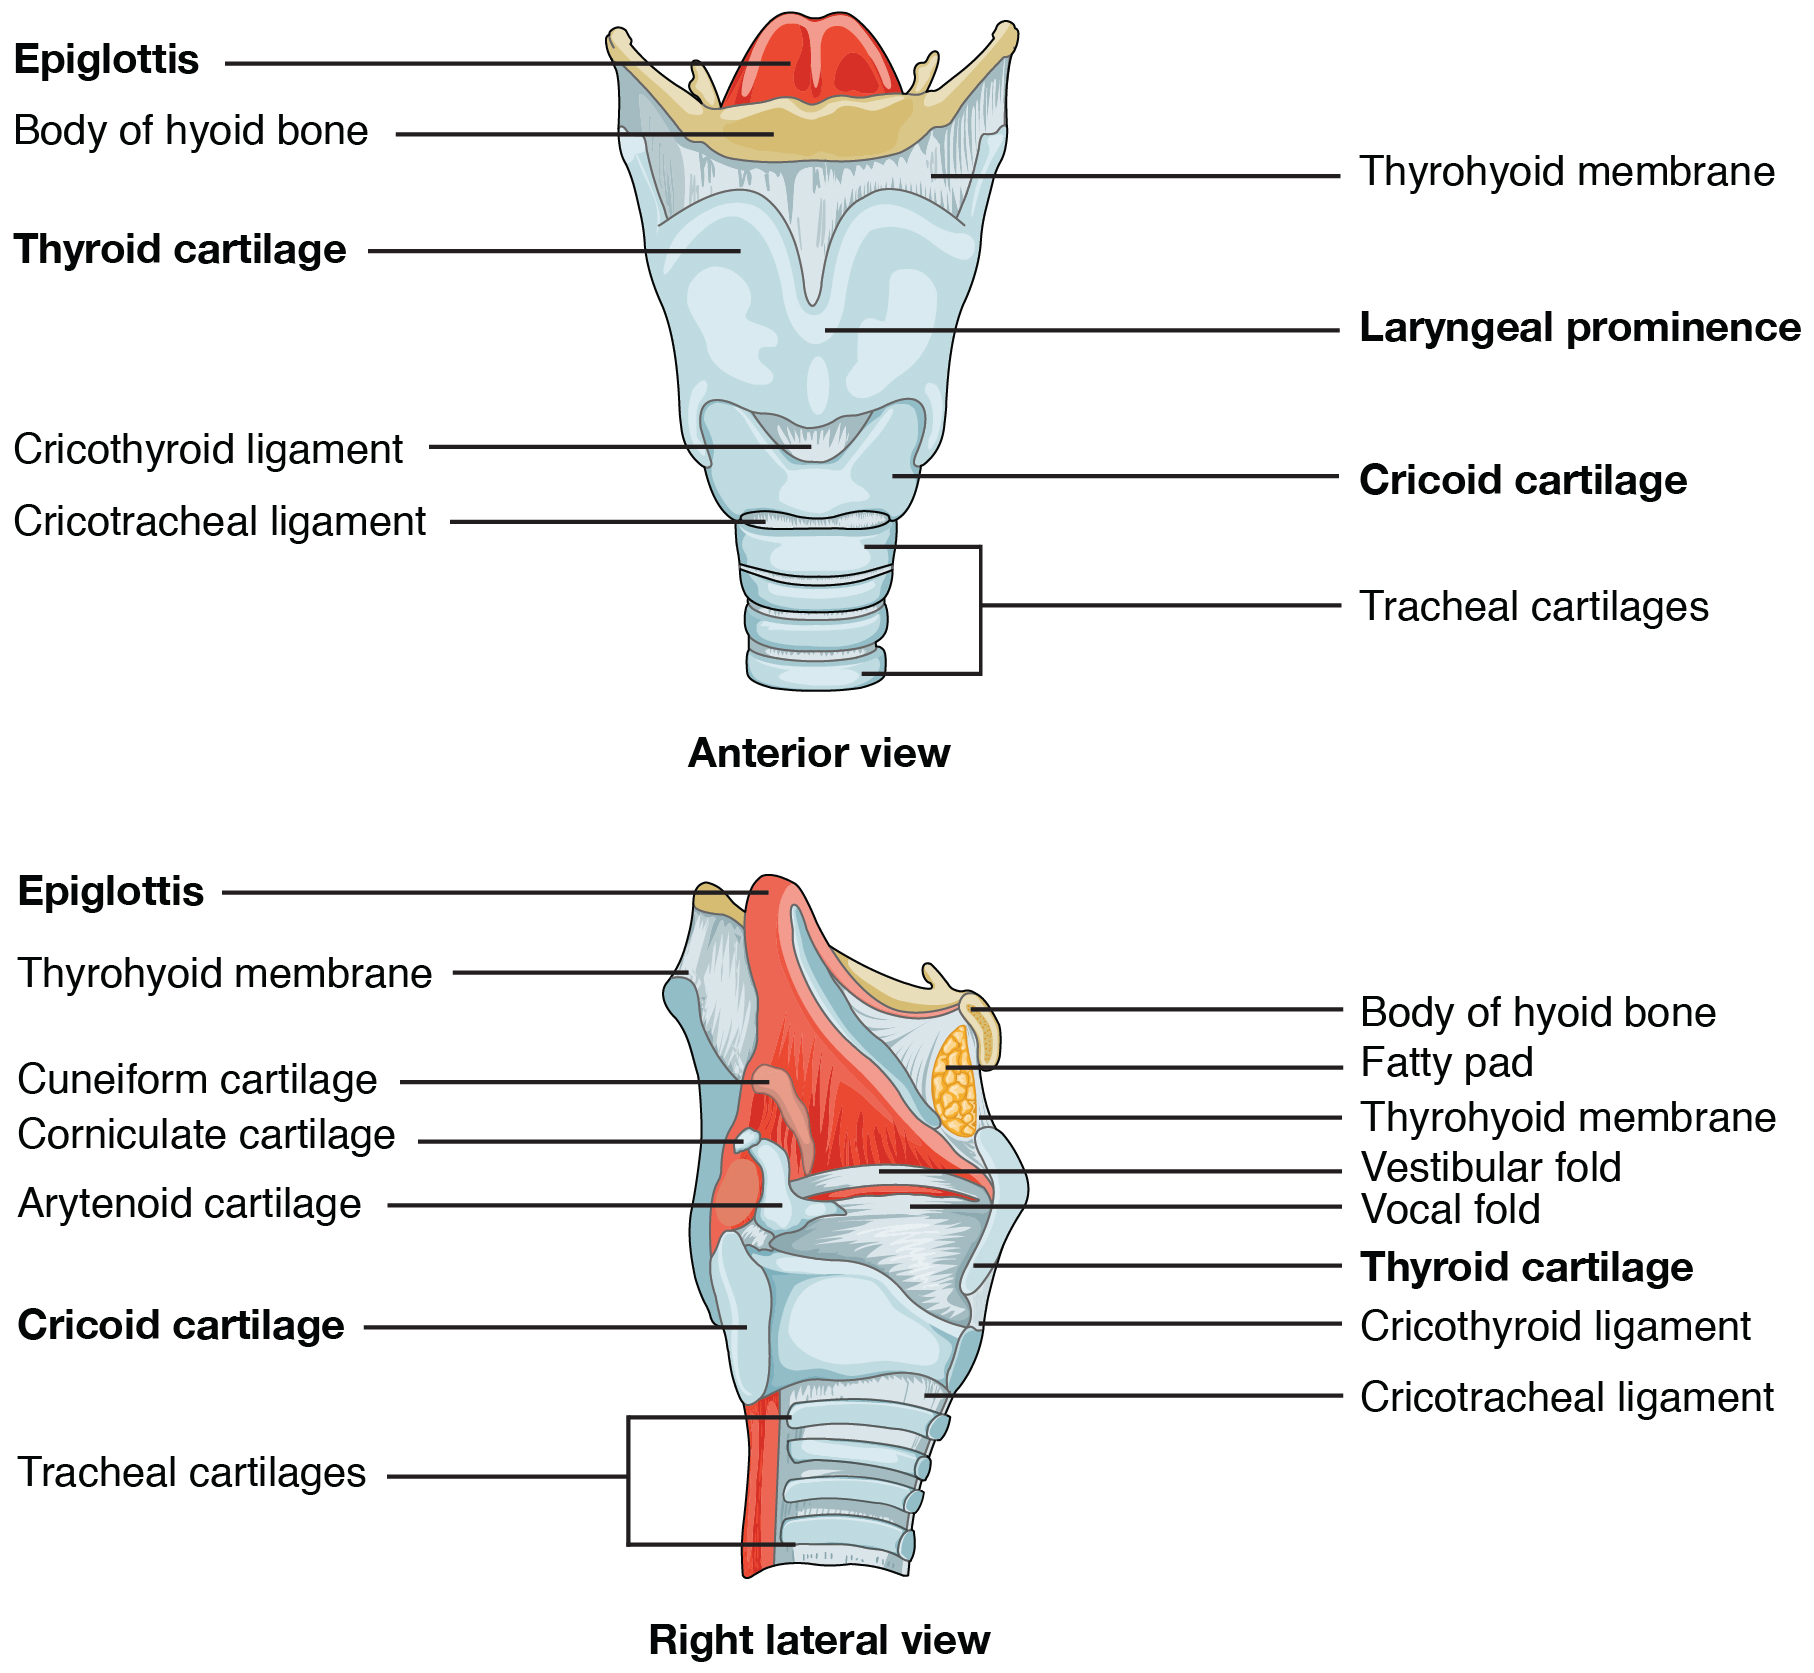 Larynx Contemporary Health Issues Course Hero